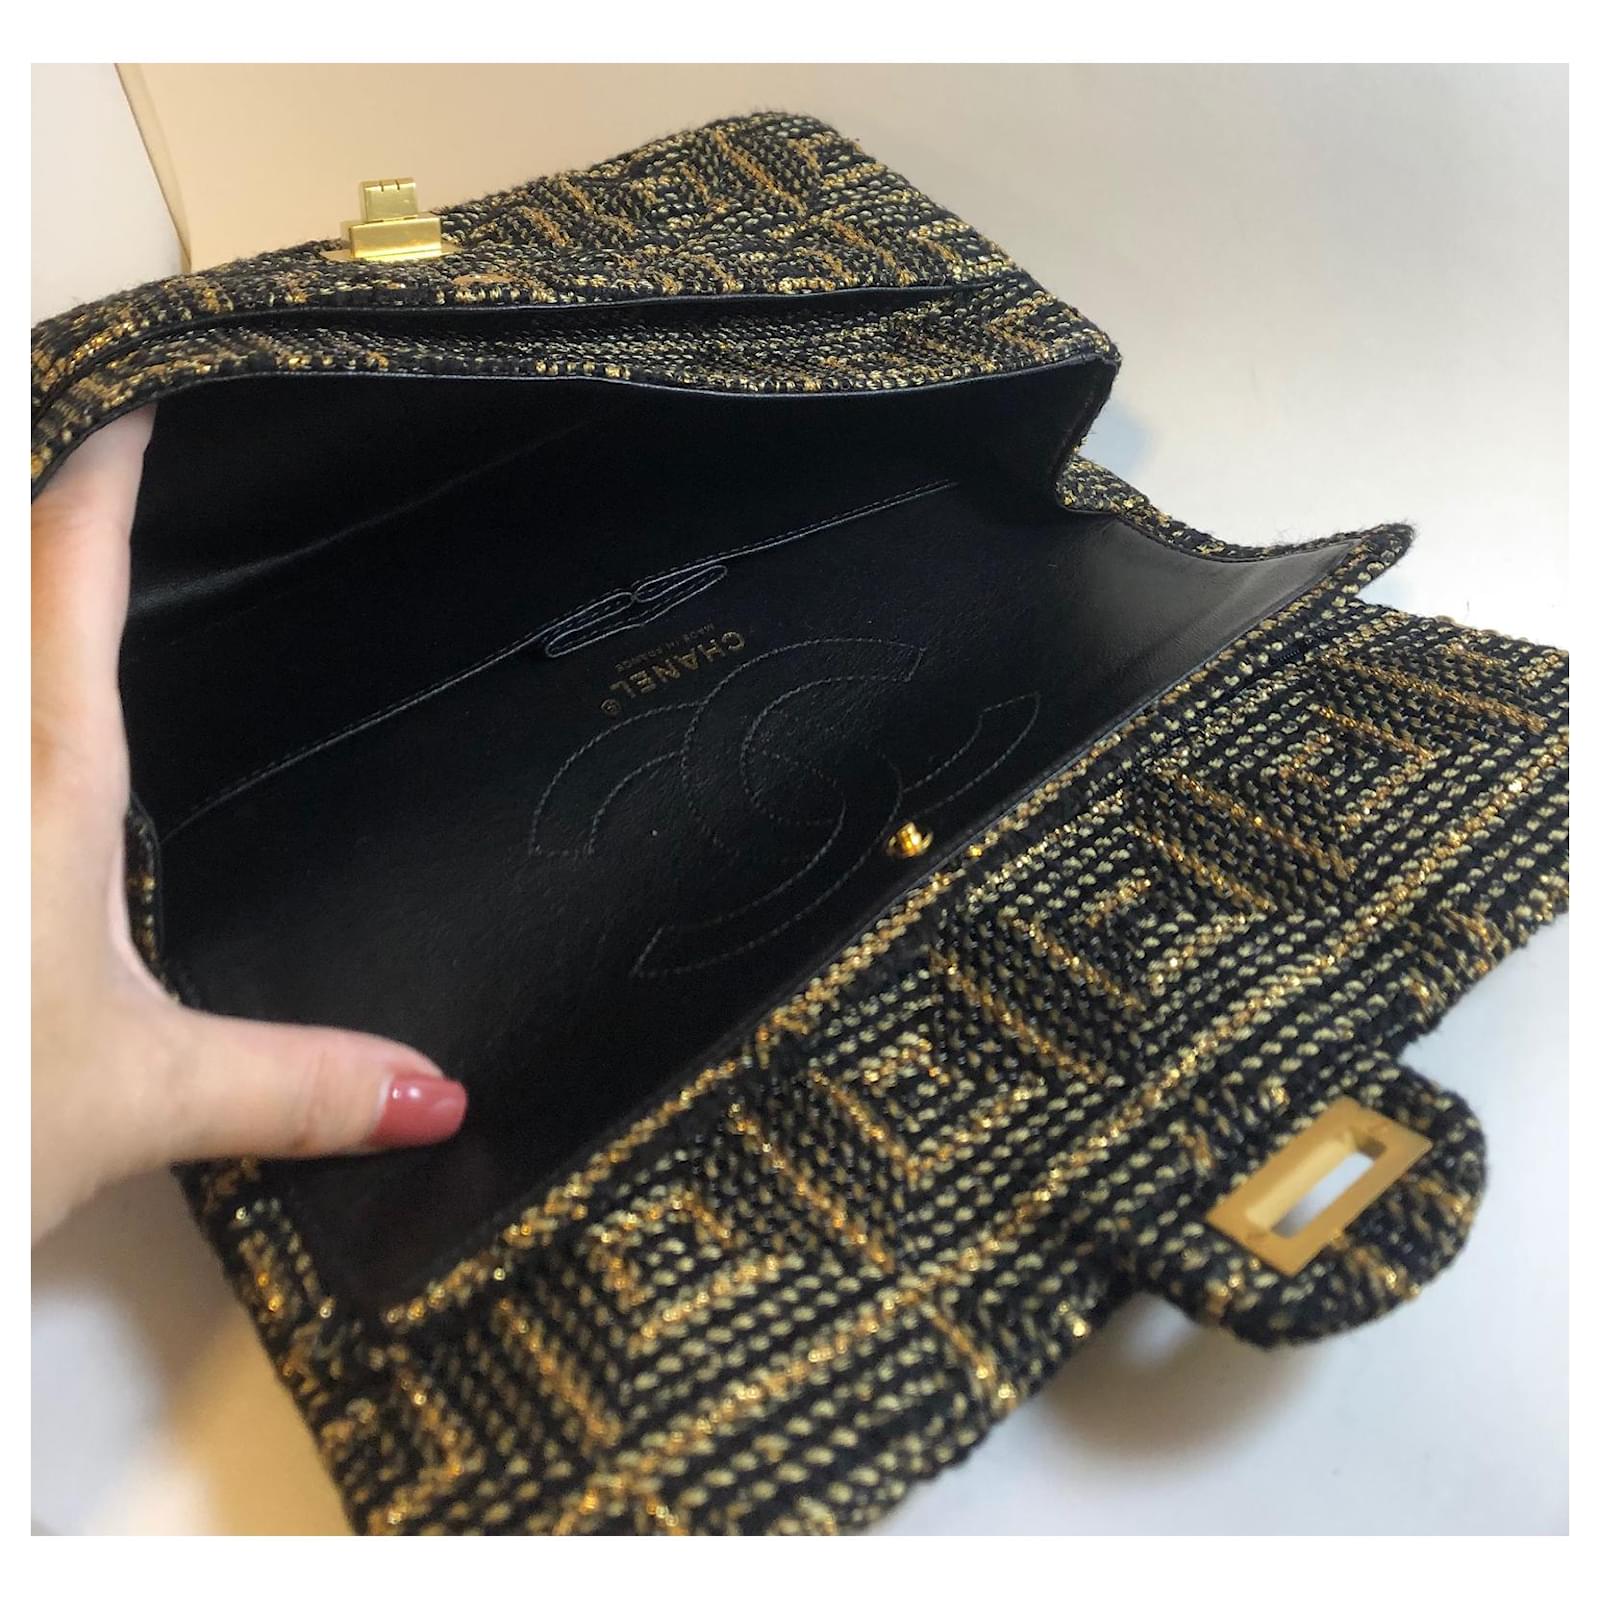 Chanel Limited Edition Rare Paris-Byzance Gold and Black Tweed